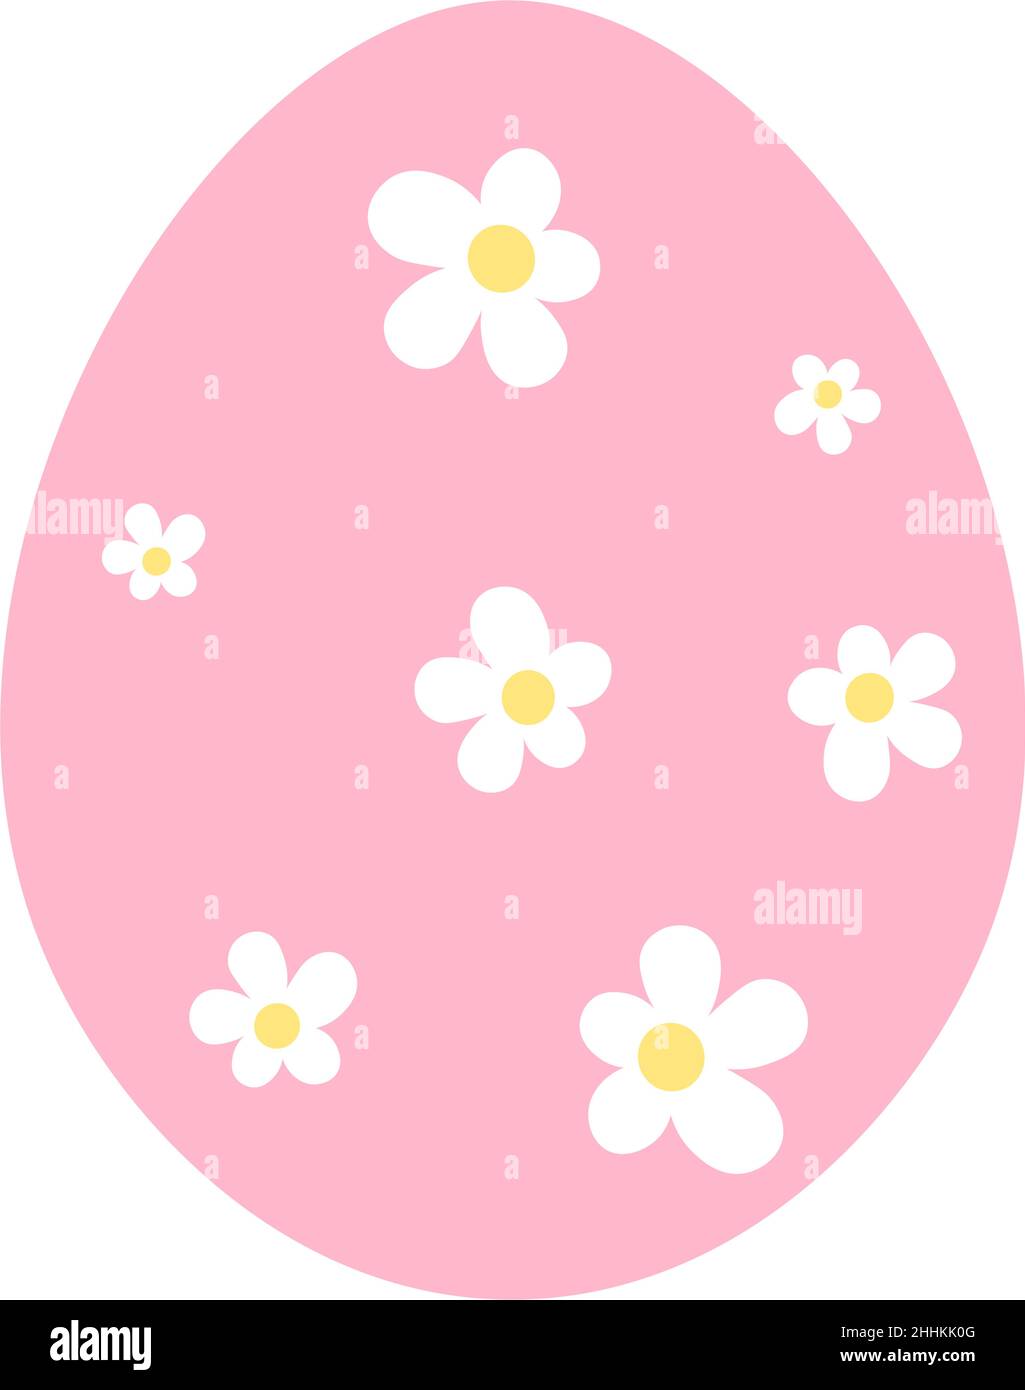 Easter eggs. Cute decoration. Concept of the Happy Easter holiday. Vector isolated illustration. Stock Vector